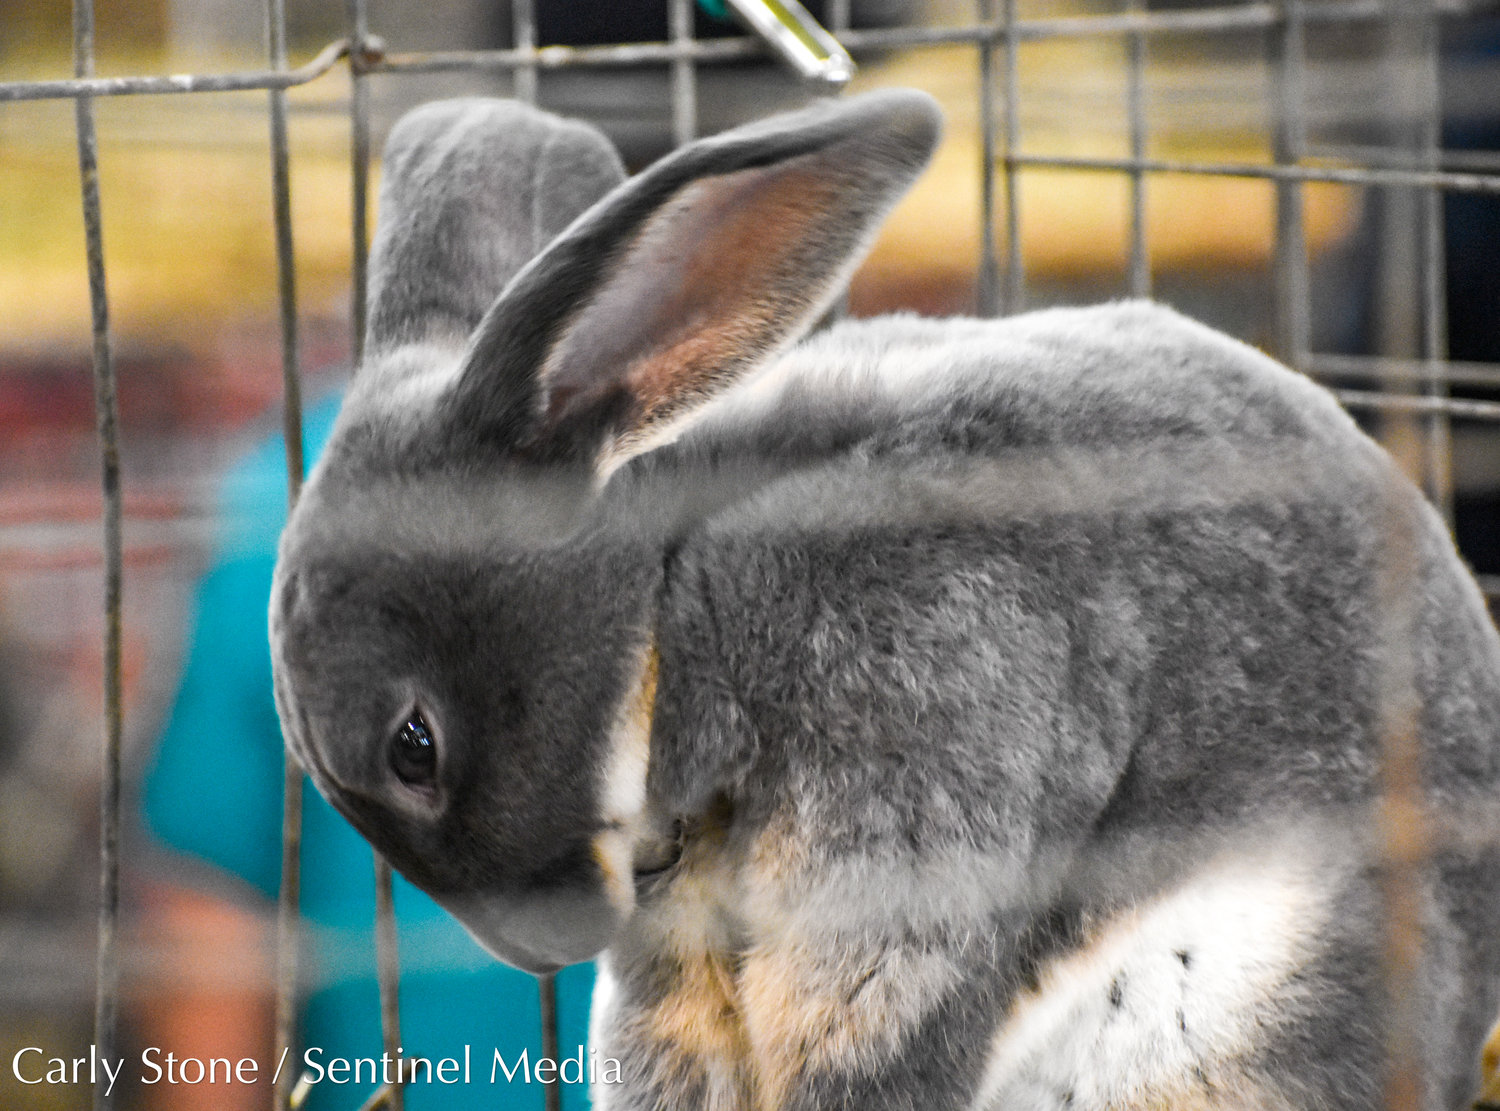 This is one of the dozens of rabbits on display in the poultry building at the NYS Fair.